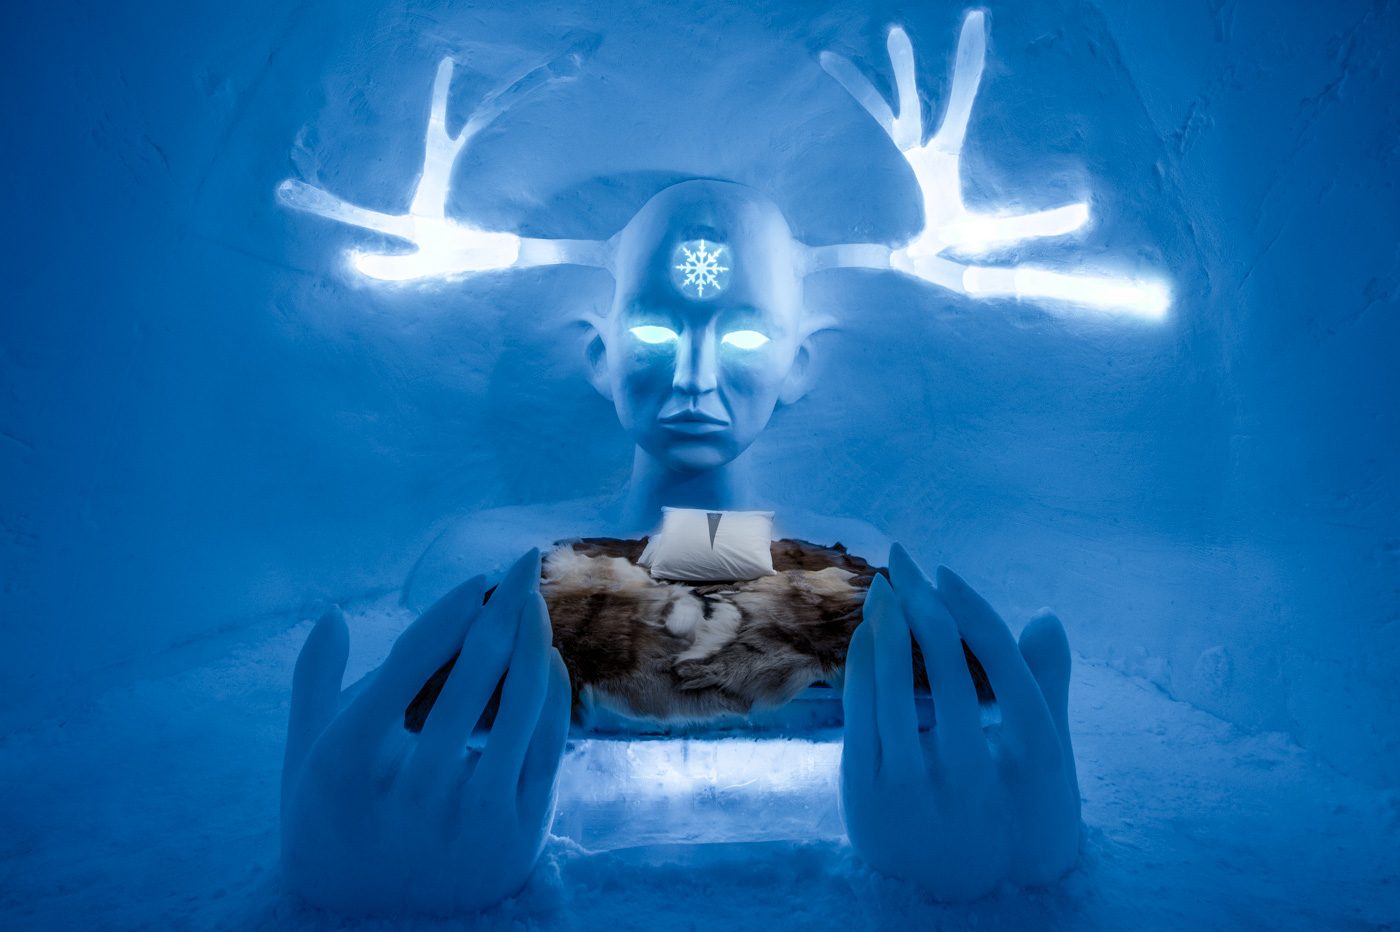 art-suite-queen-of-the-north-icehotel-28-1400x932